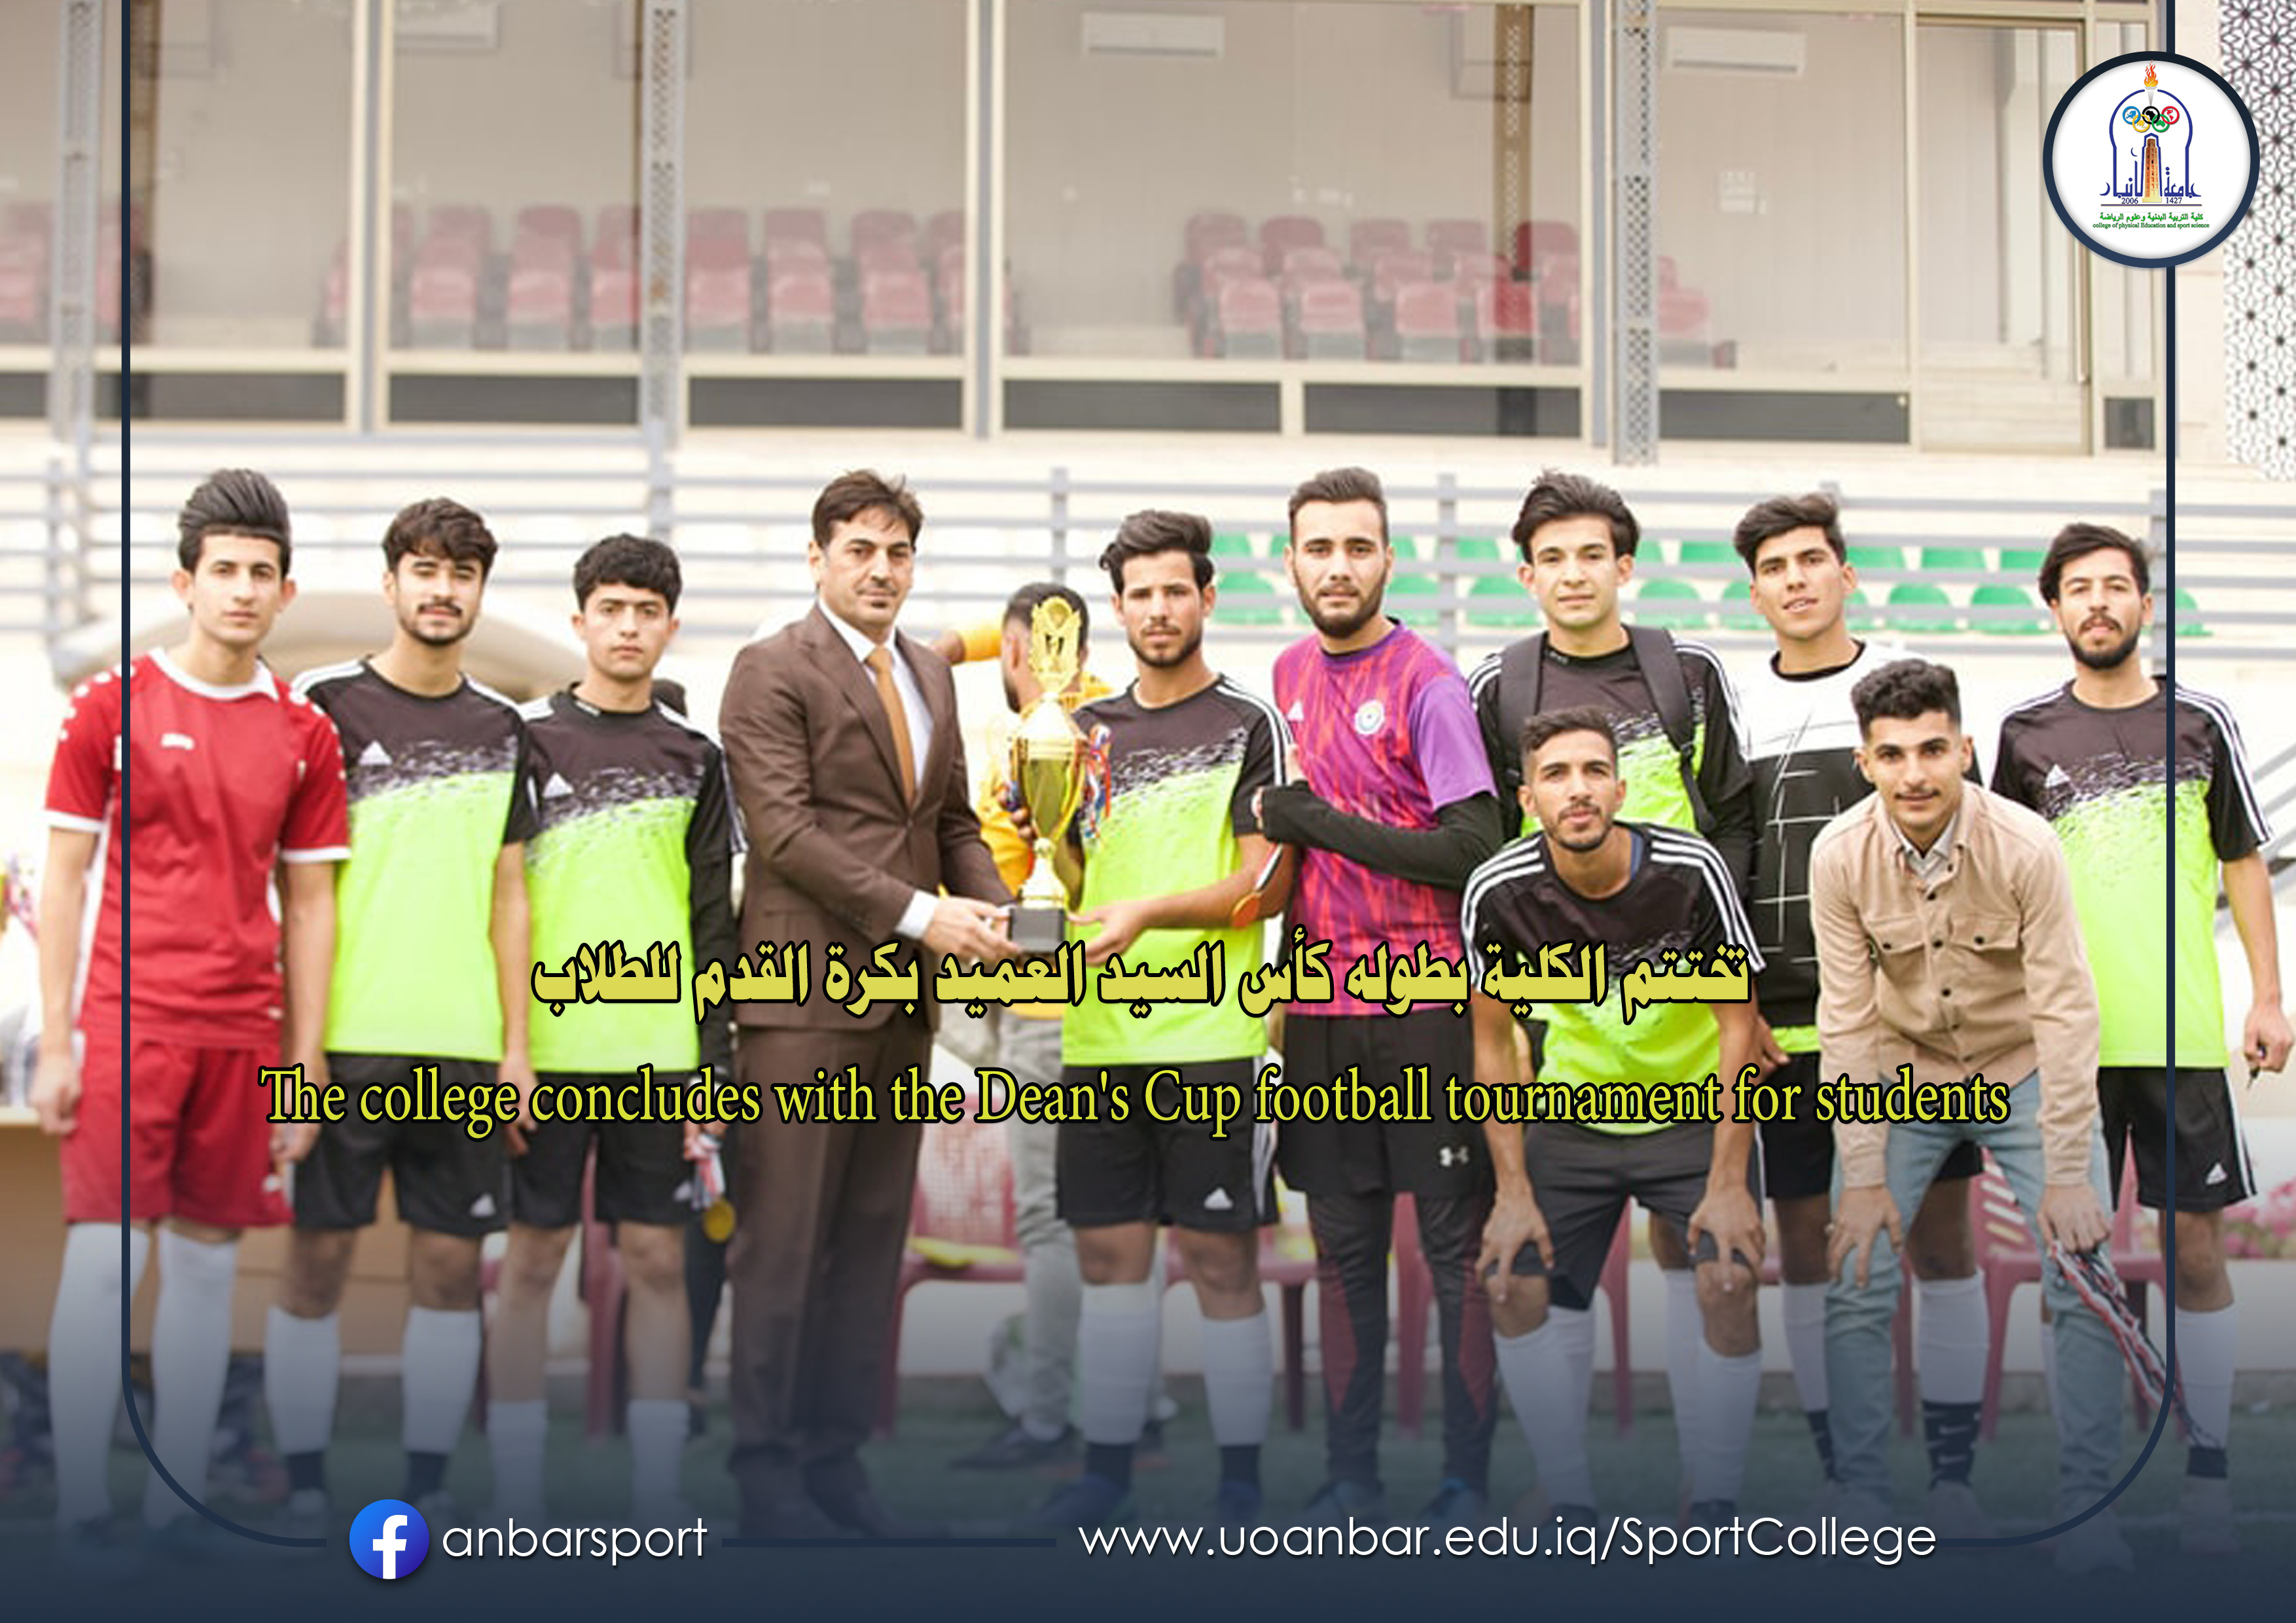 The college concludes with the Dean's Cup football tournament for students